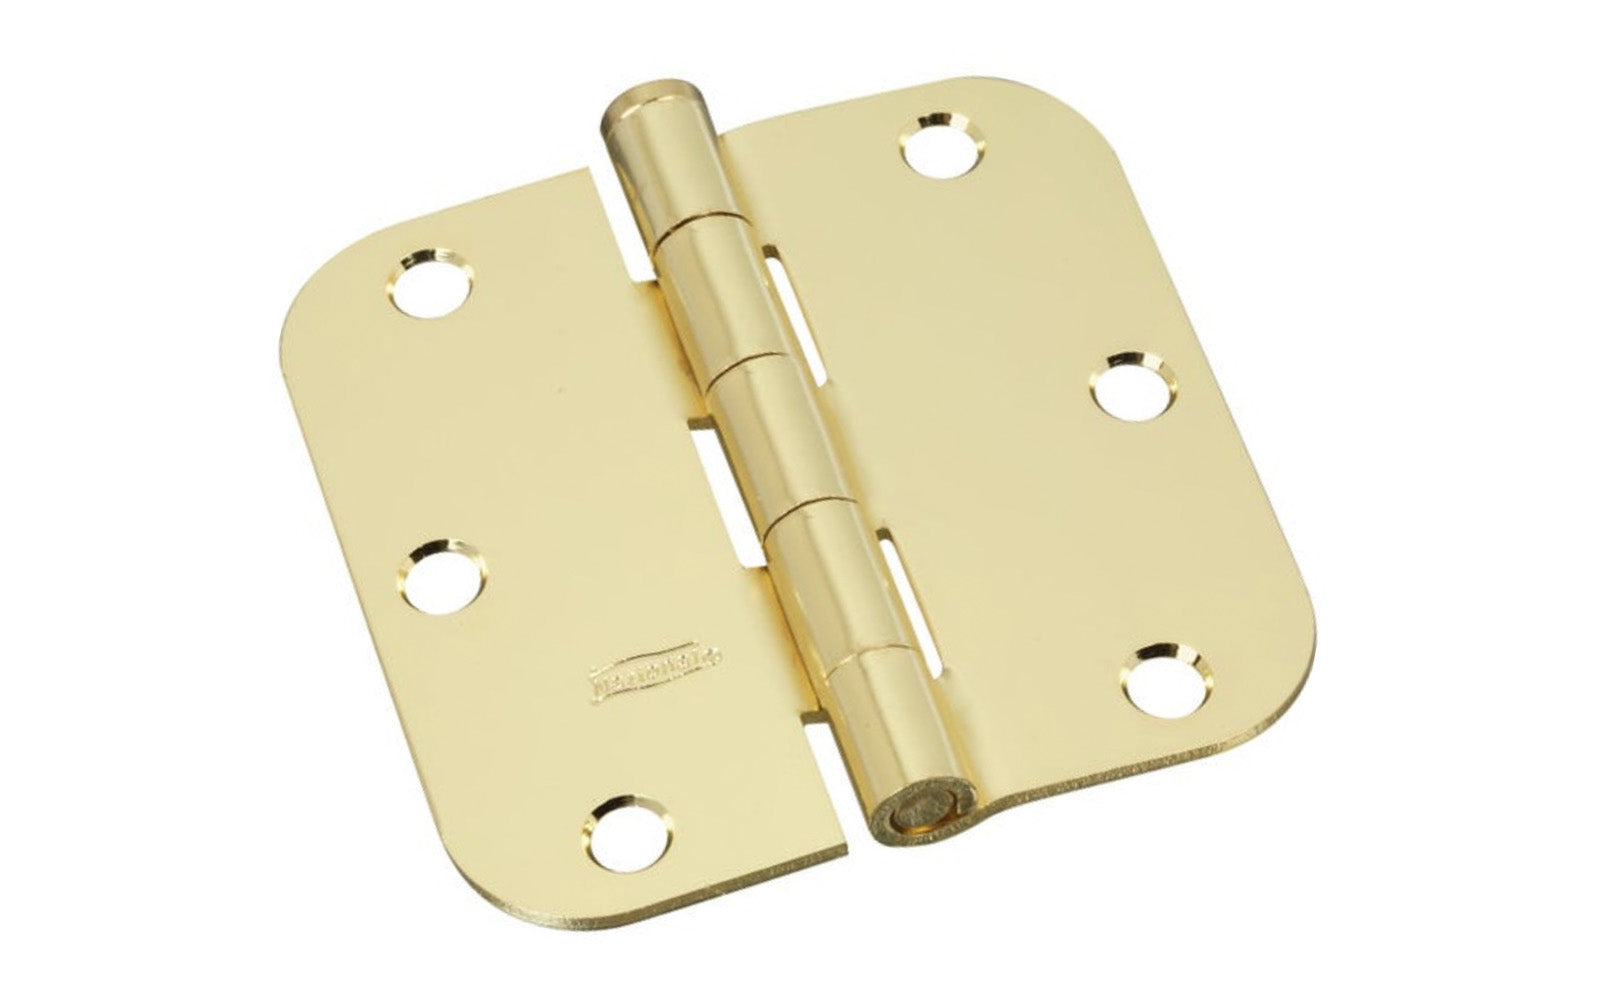 3-1/2" Bright Brass Door Hinge with 5/8" radius corners & a removable pin. Bright Brass finish on steel material. Countersunk holes. Includes flat head screws. 3-1/2" x 3-1/2" door hinge size. Five knuckle, full mortise design. National Hardware Model No. N830-206. 886780009460